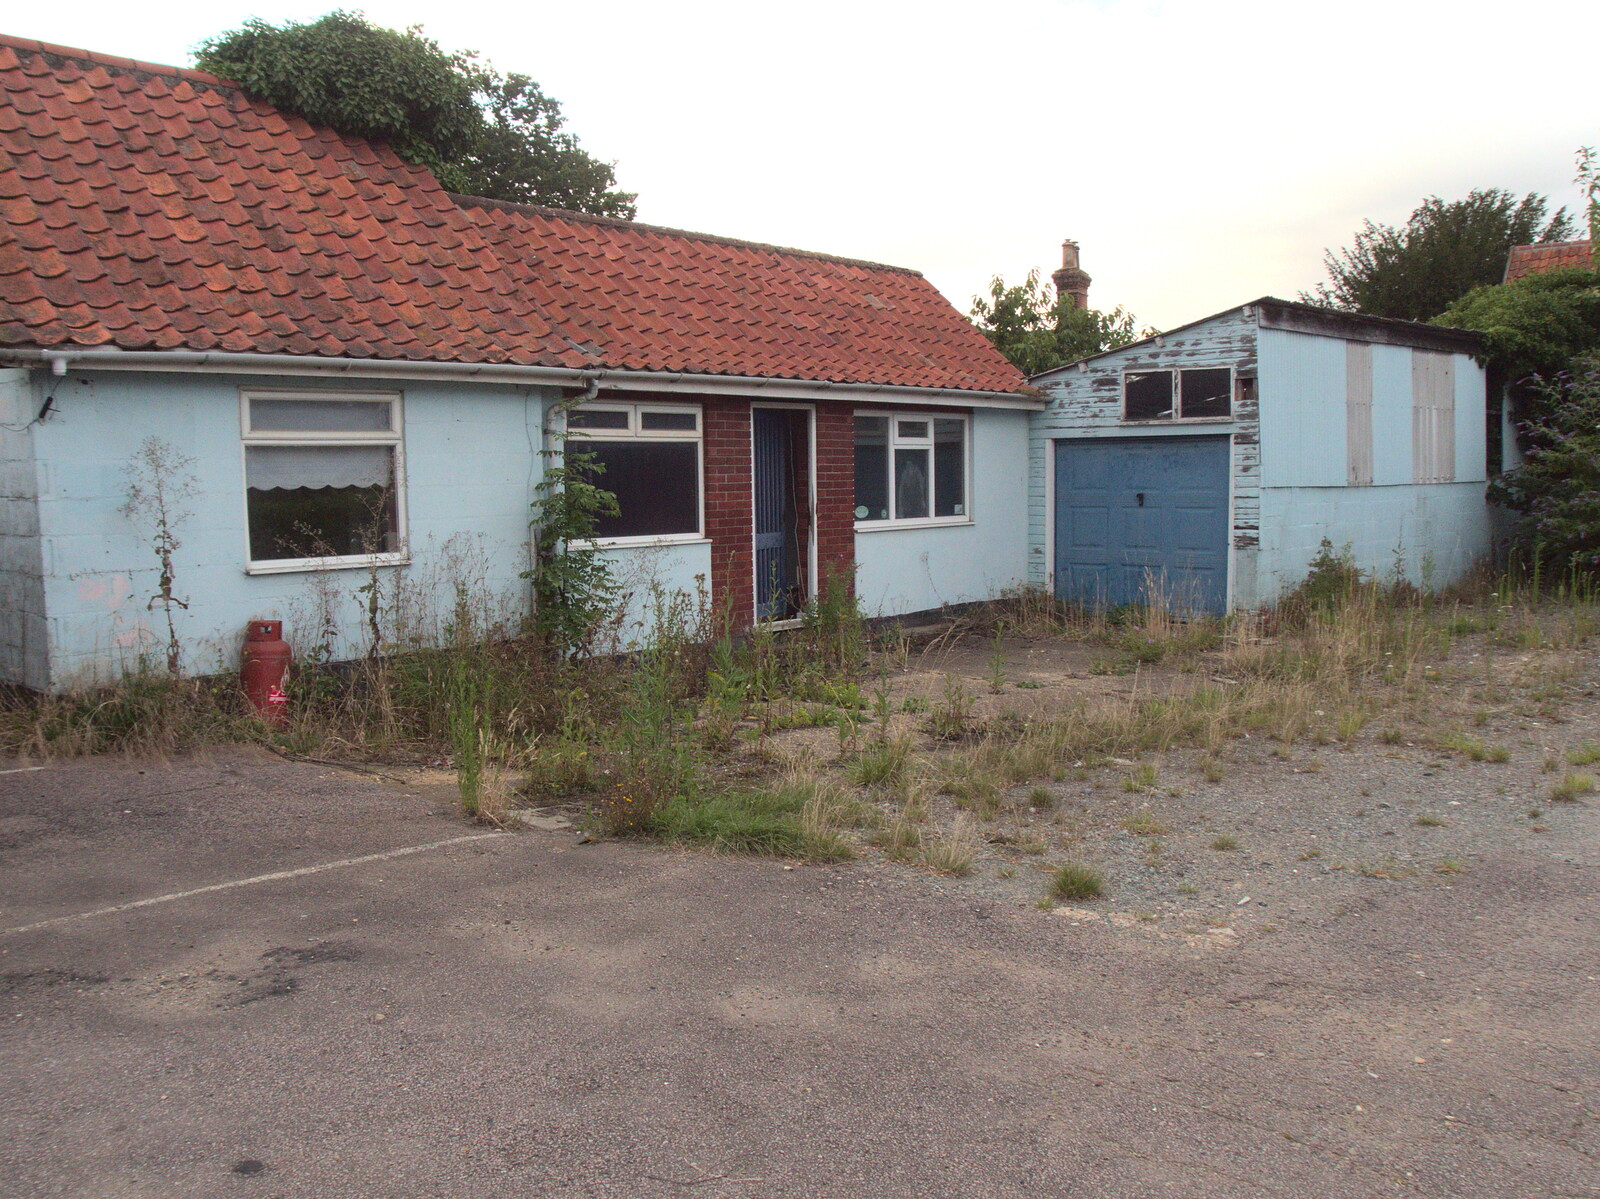 A derelict bungalow, which was used as offices from The BSCC at The Crown, Dickleburgh, Norfolk - 19th August 2021